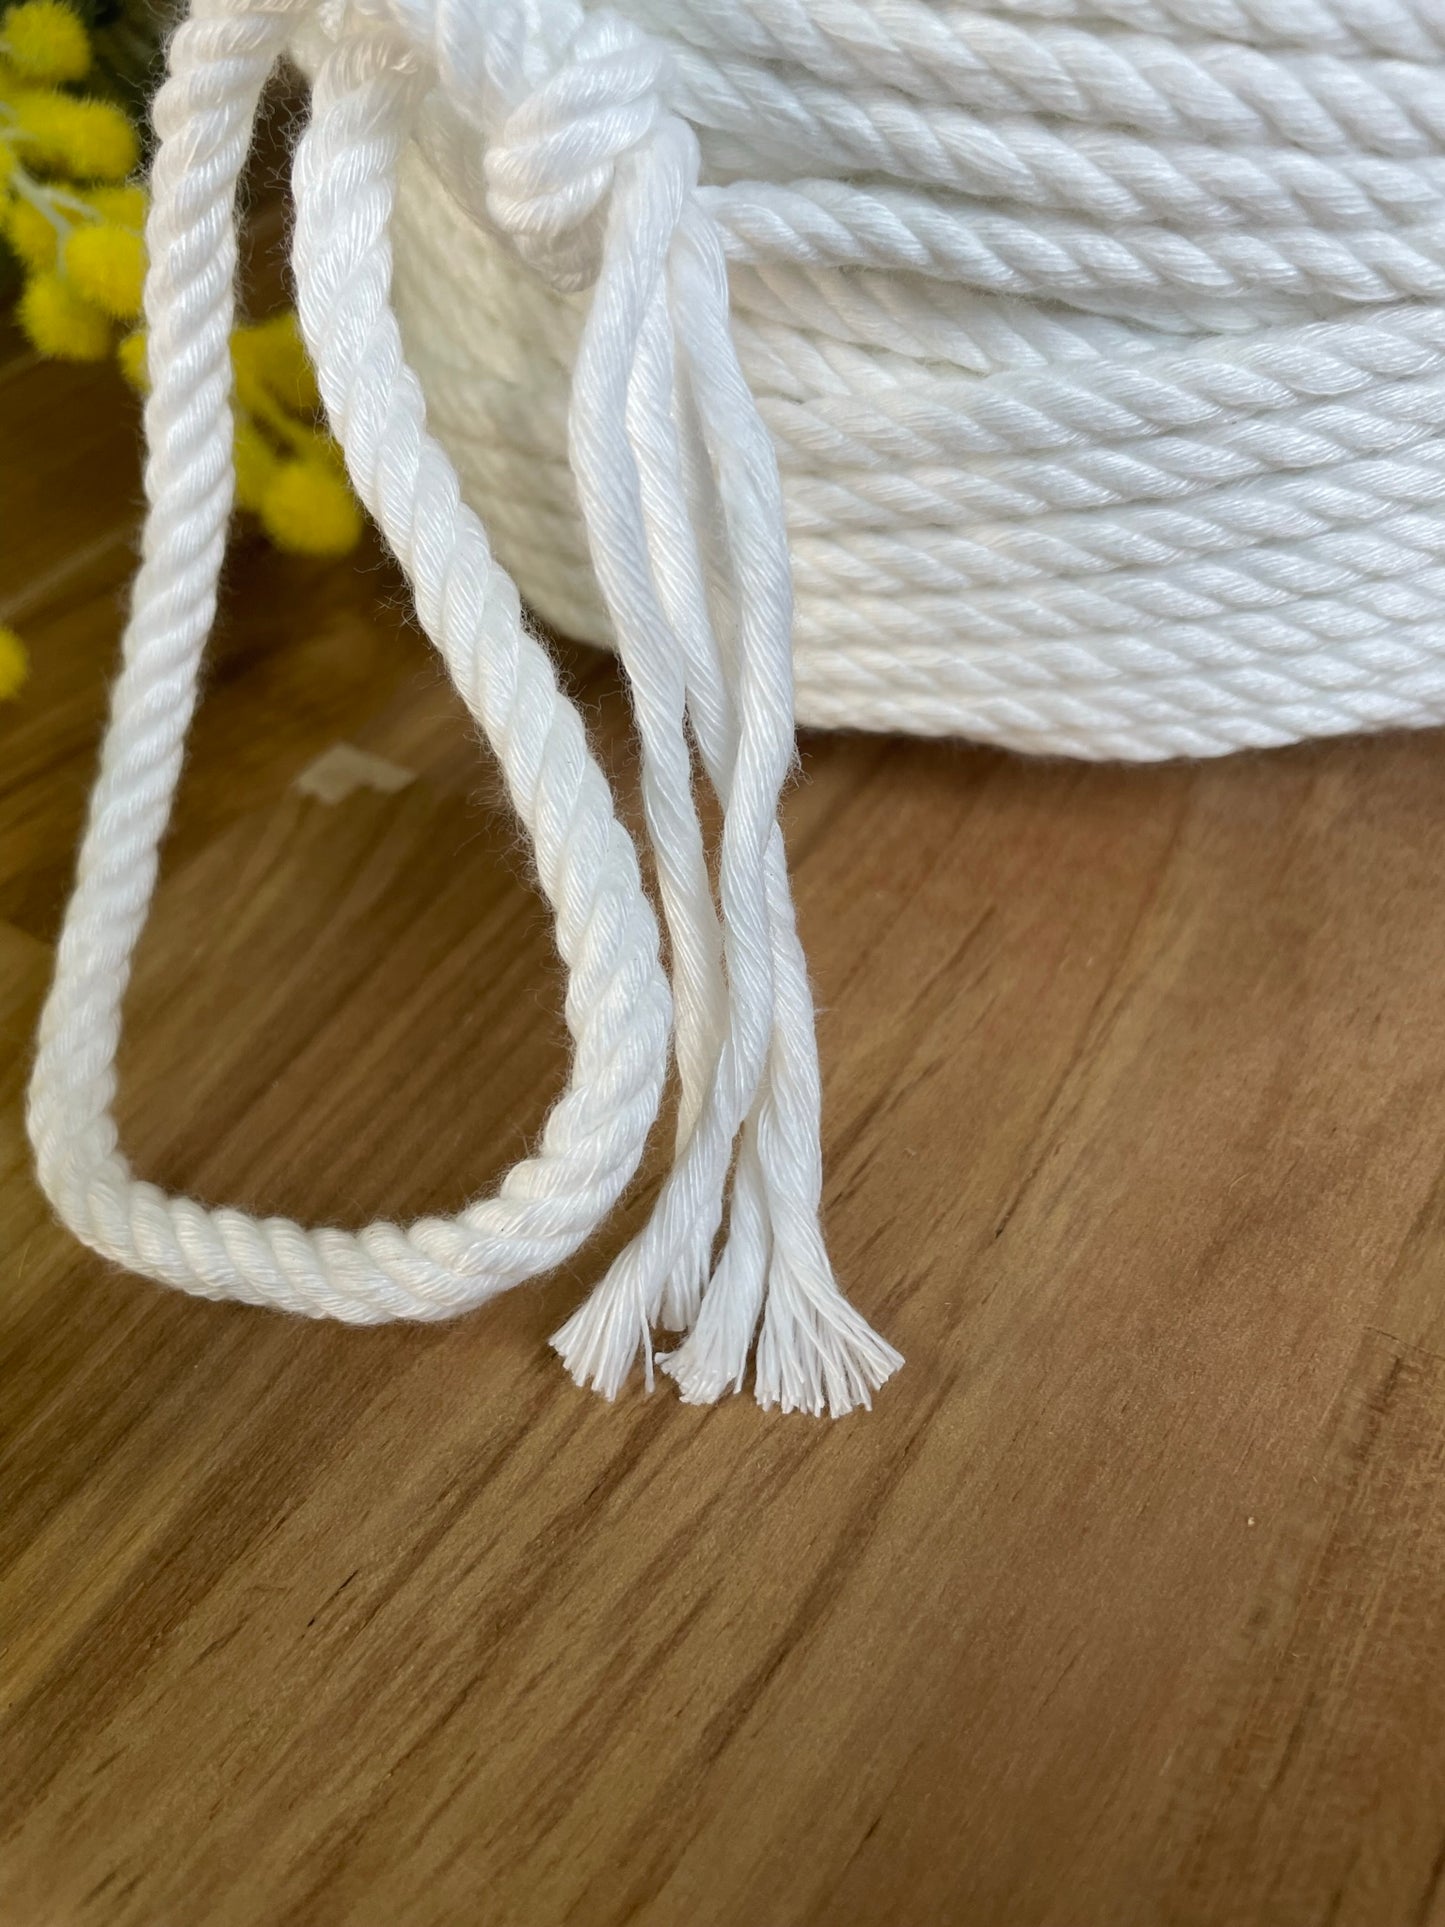 6mm Twisted Spun Polyester Rope 2kg